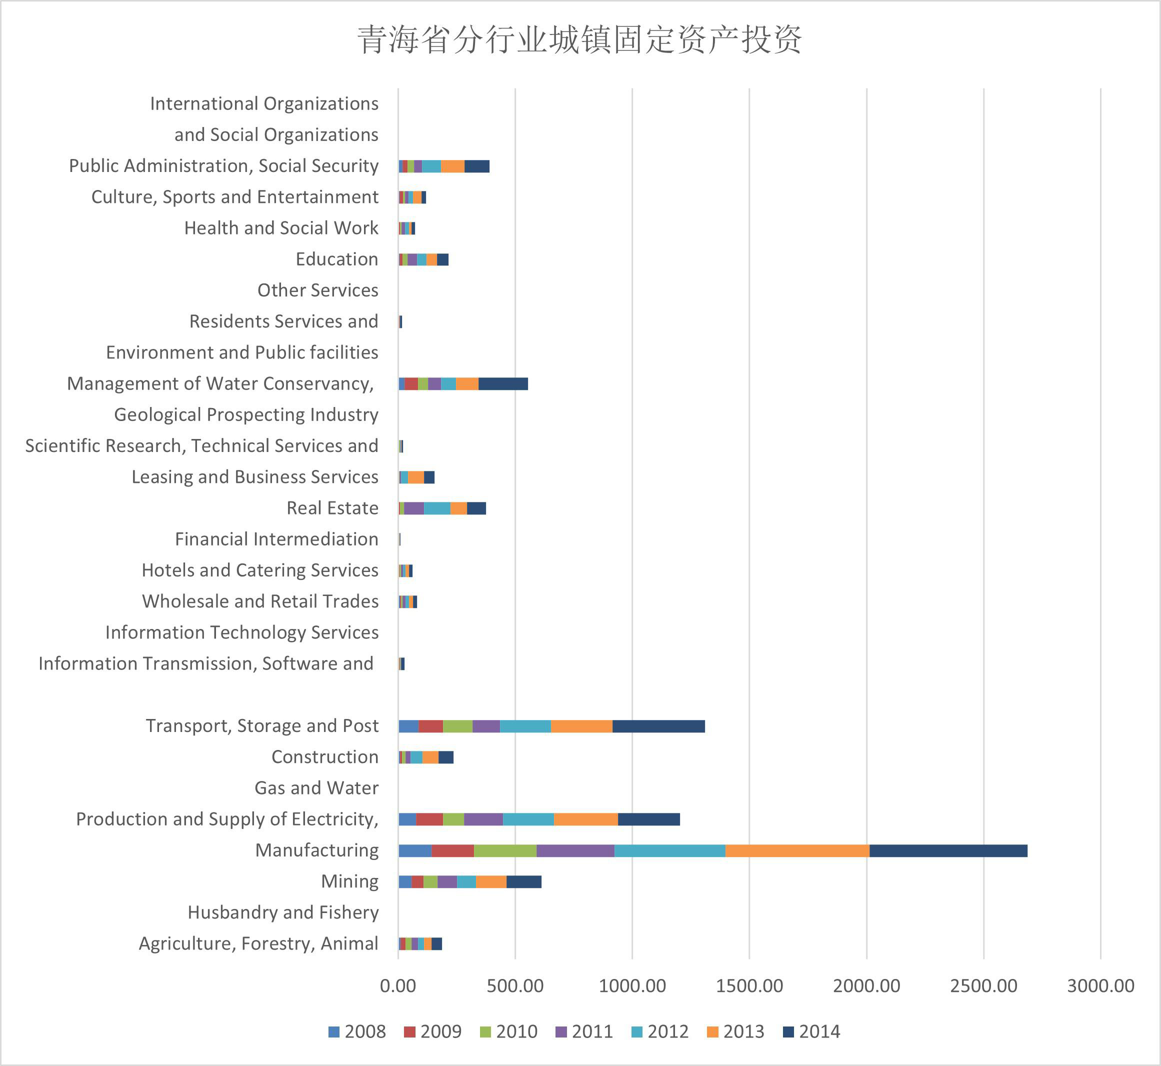 Investment in urban fixed assets by industry in Qinghai Province (2007-2014)